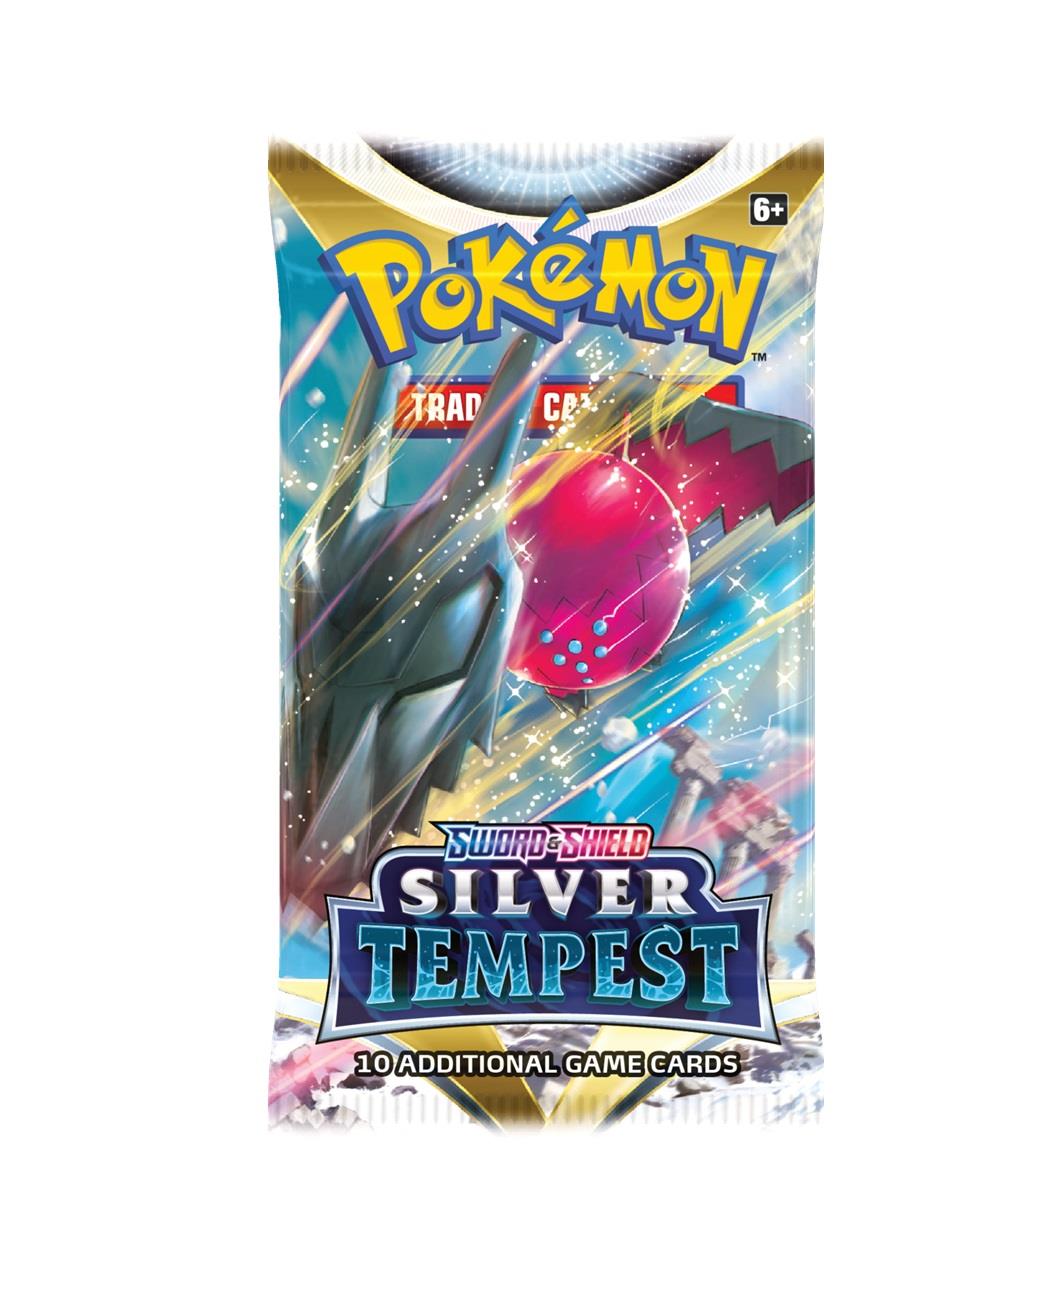 Pokémon TCG booster Sword & Shield Silver Tempest Boosterpack